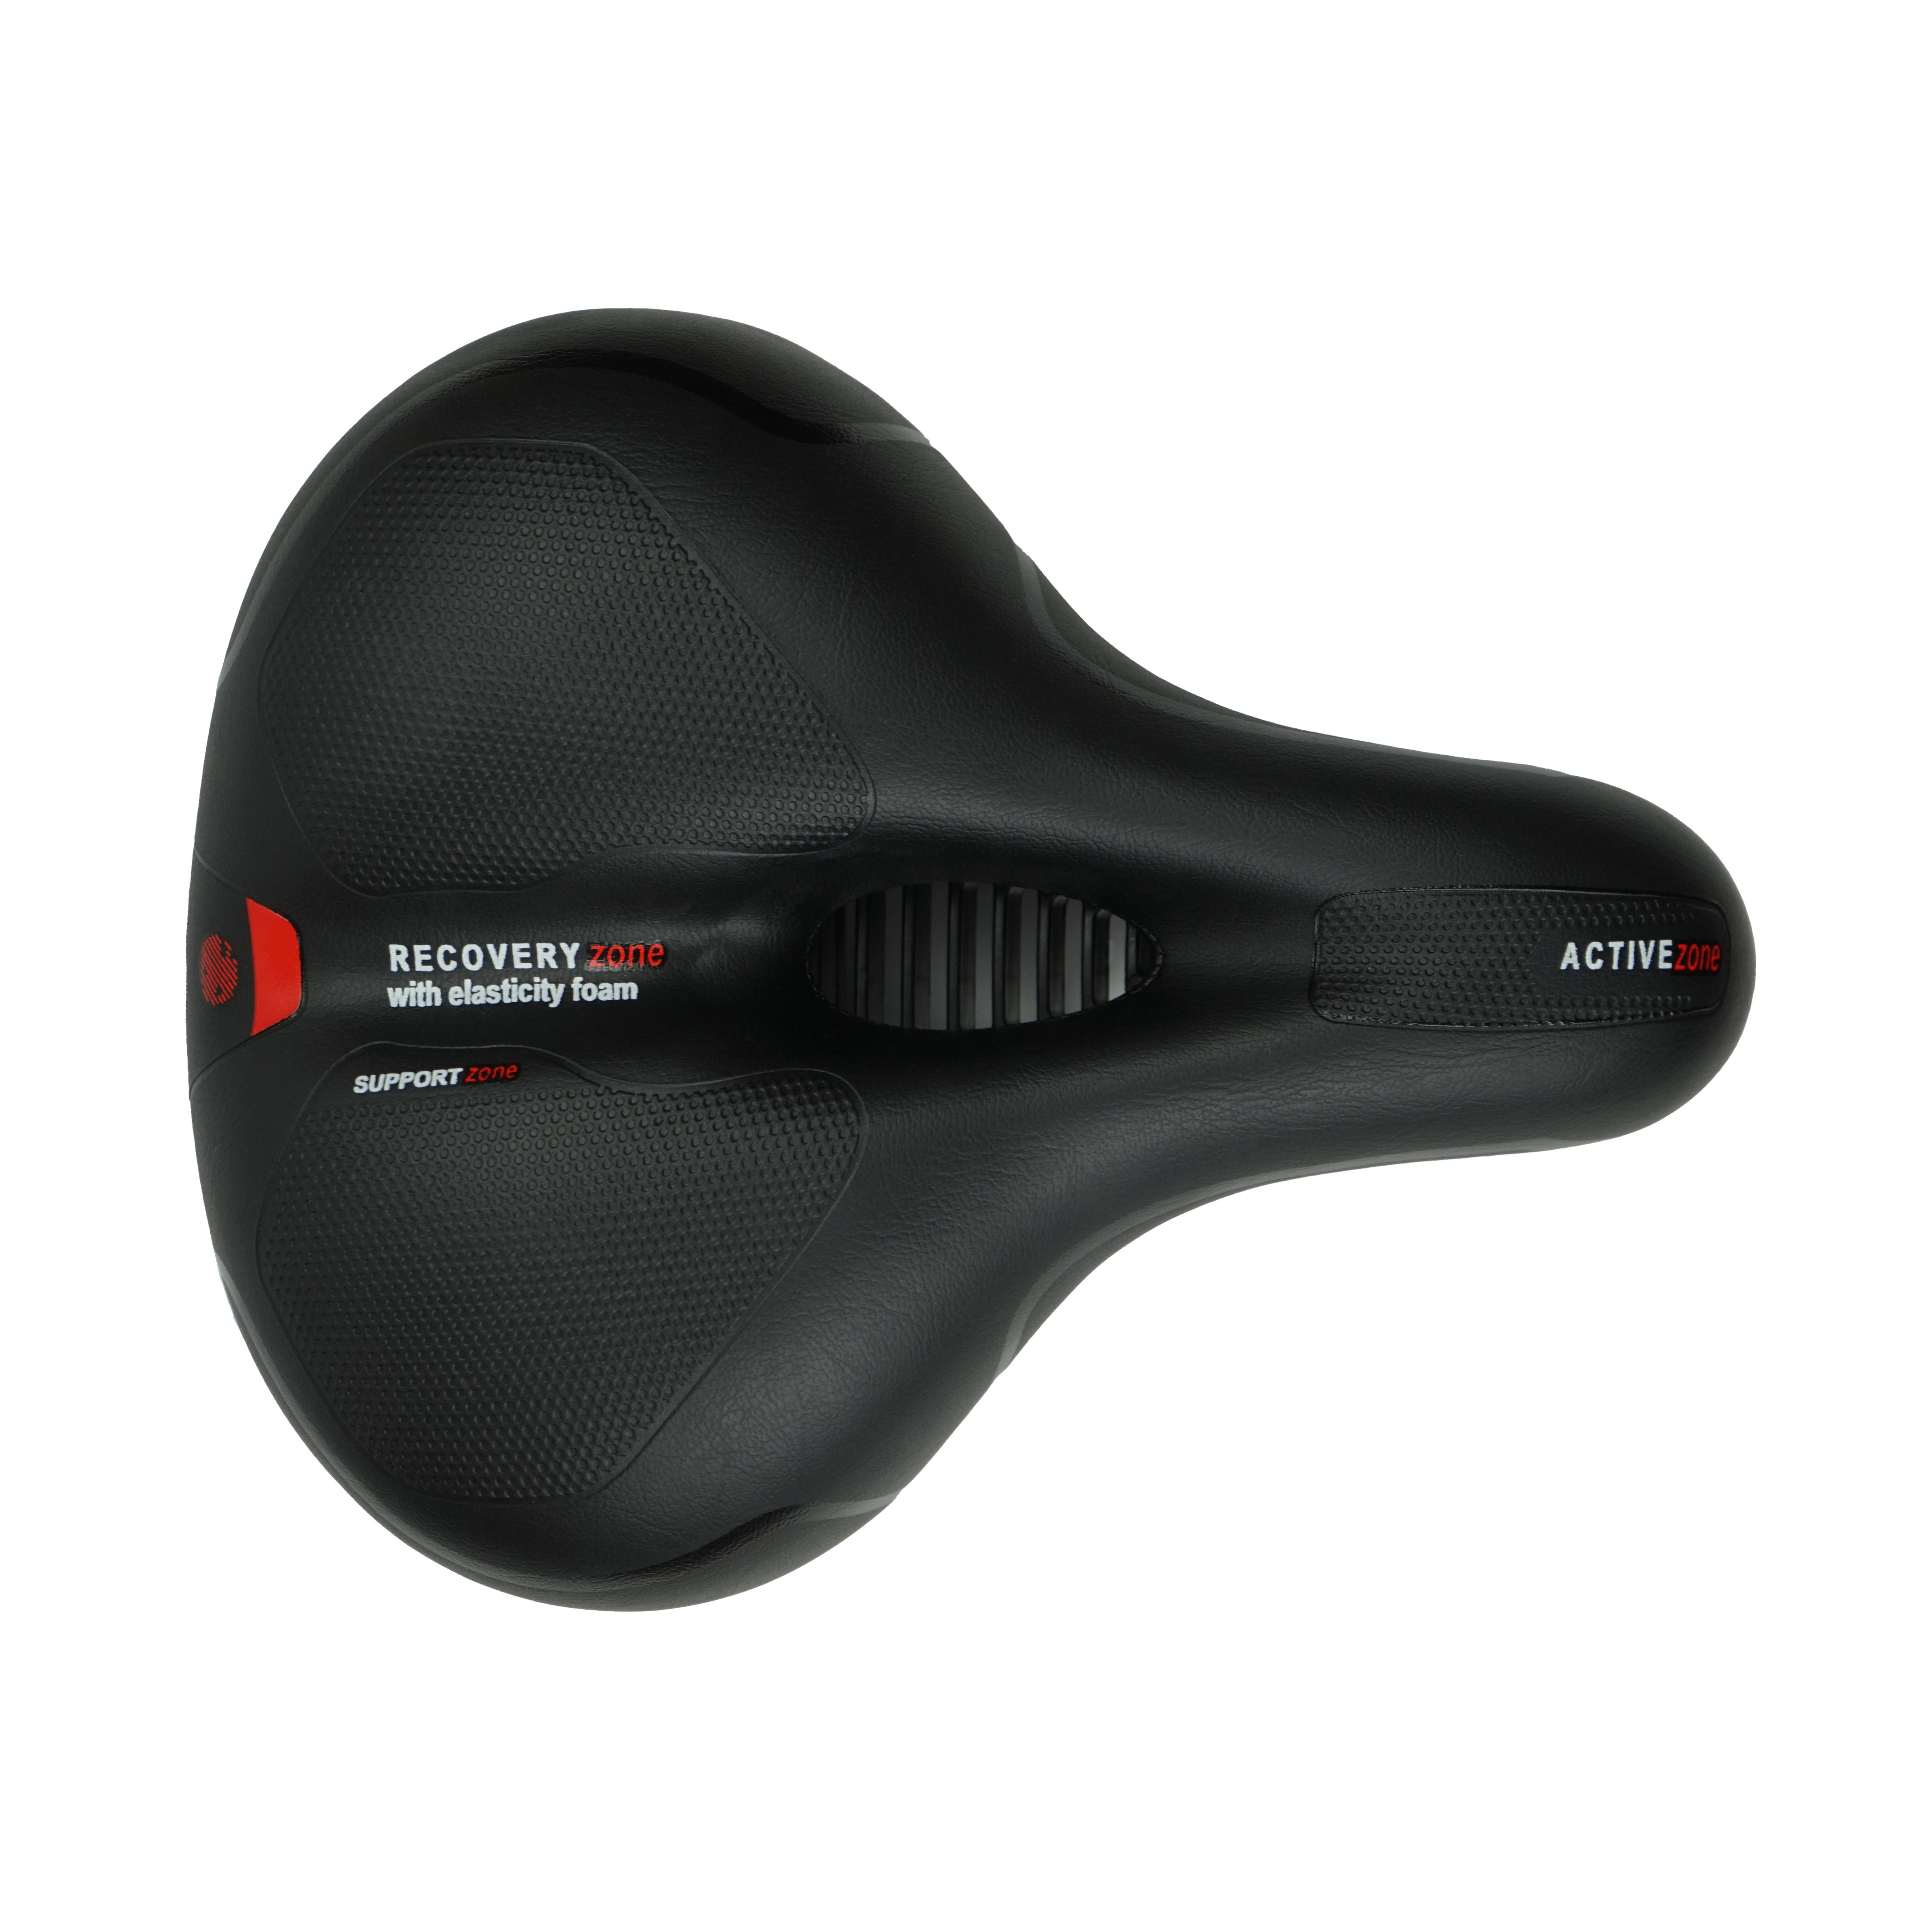 Bike Saddle for PAJ EASY Finder 4G top view